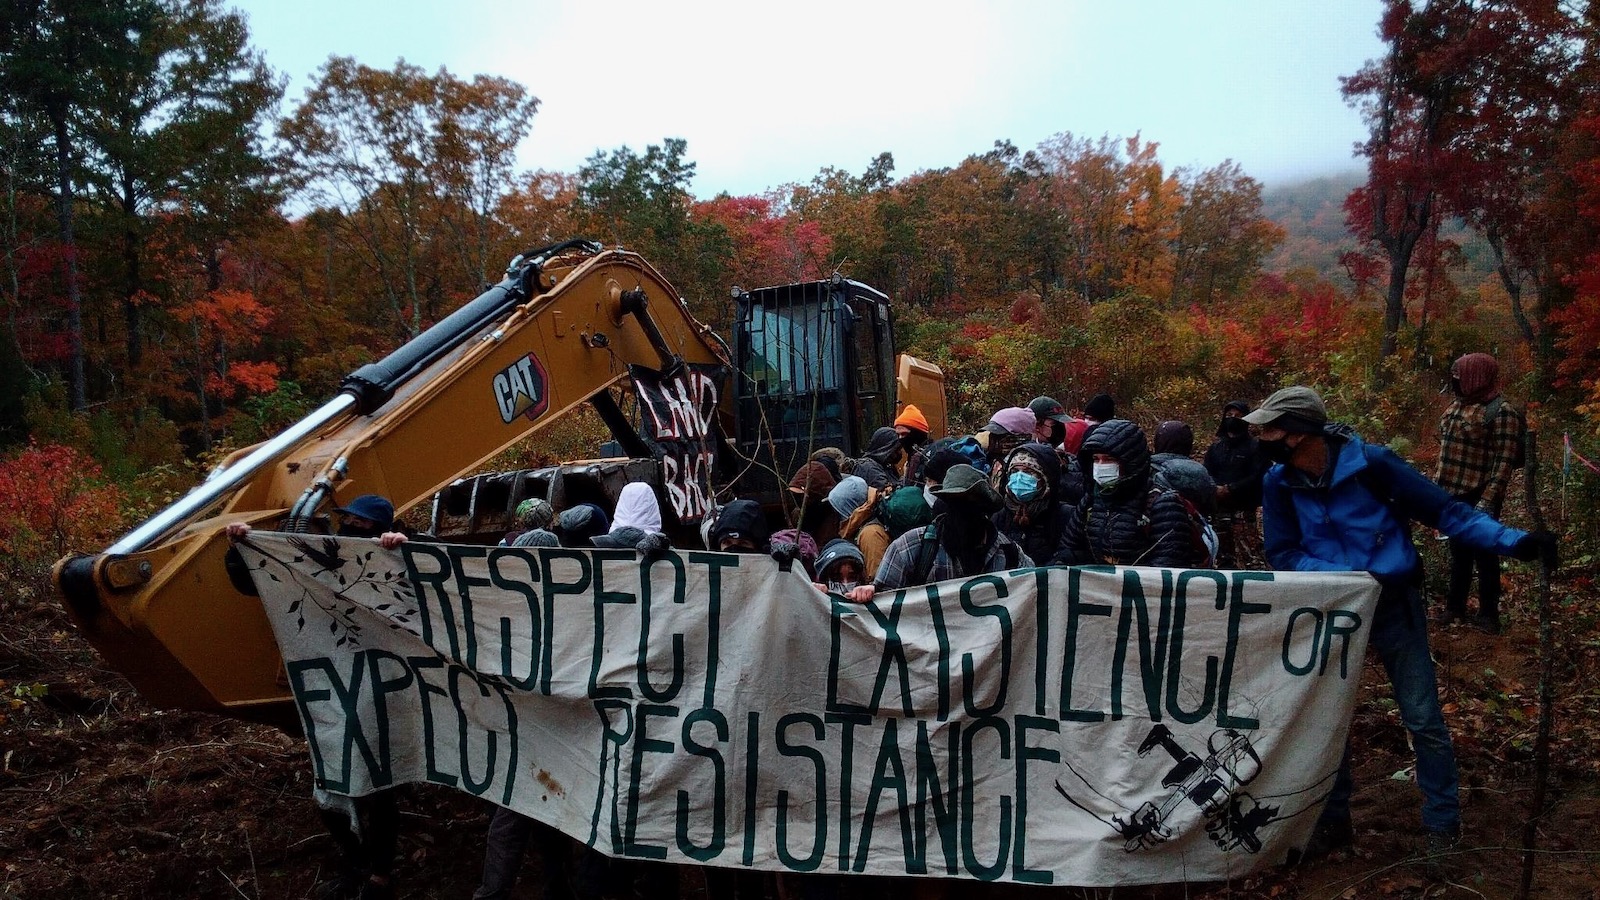 A crowed of protestors gathers behind a banner reading "Respect existence or expect resistance" at a Mountain Valley Pipeline construction site in the mountains of Virginia.